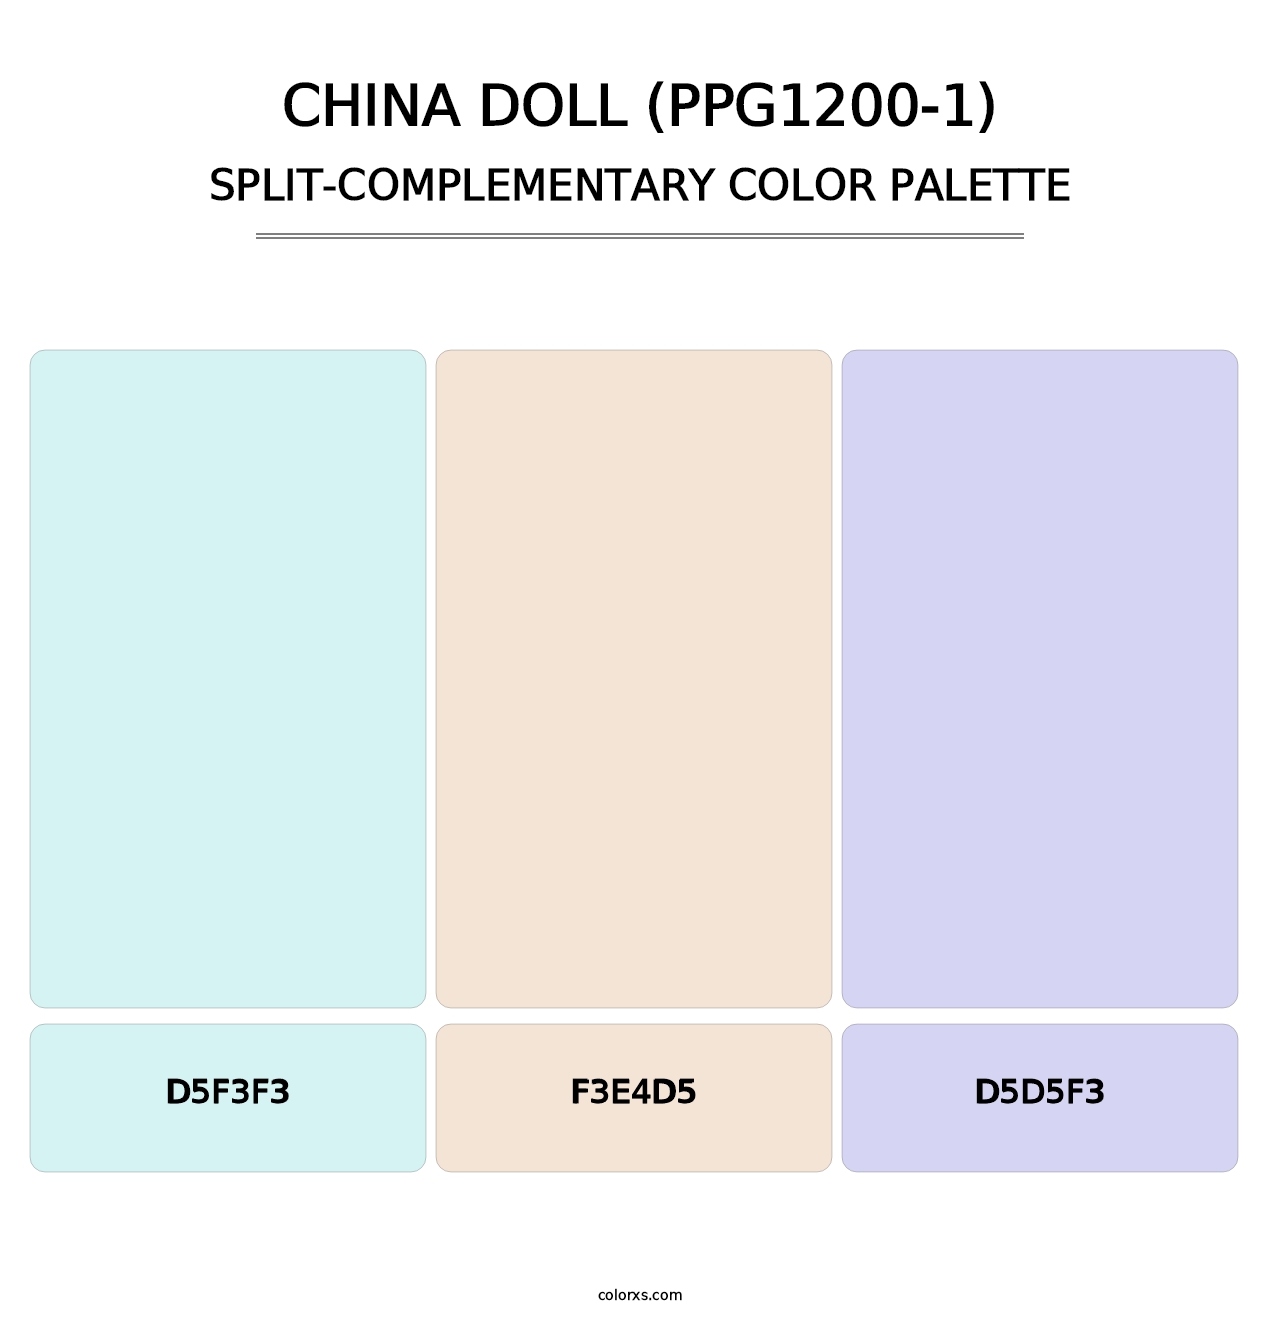 China Doll (PPG1200-1) - Split-Complementary Color Palette